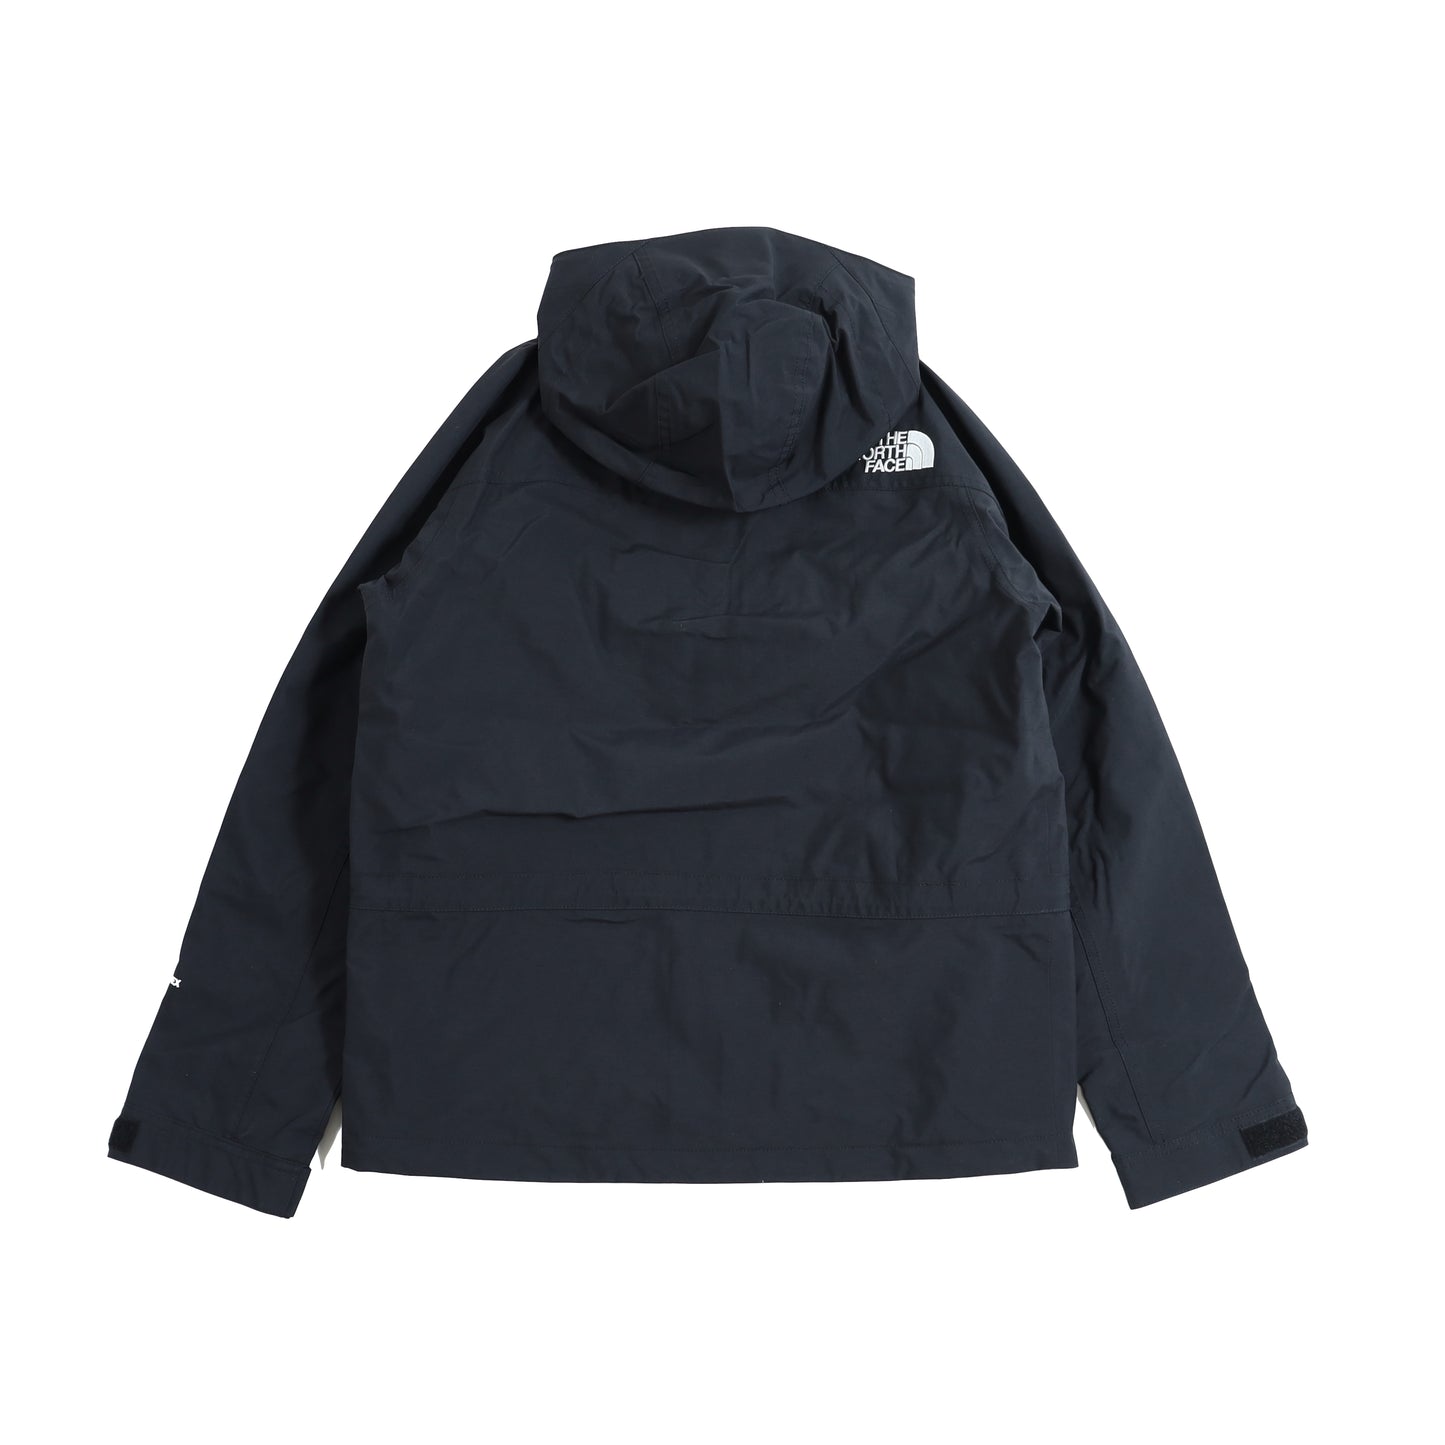 【THE NORTH FACE】Mountain Light Jacket Women's